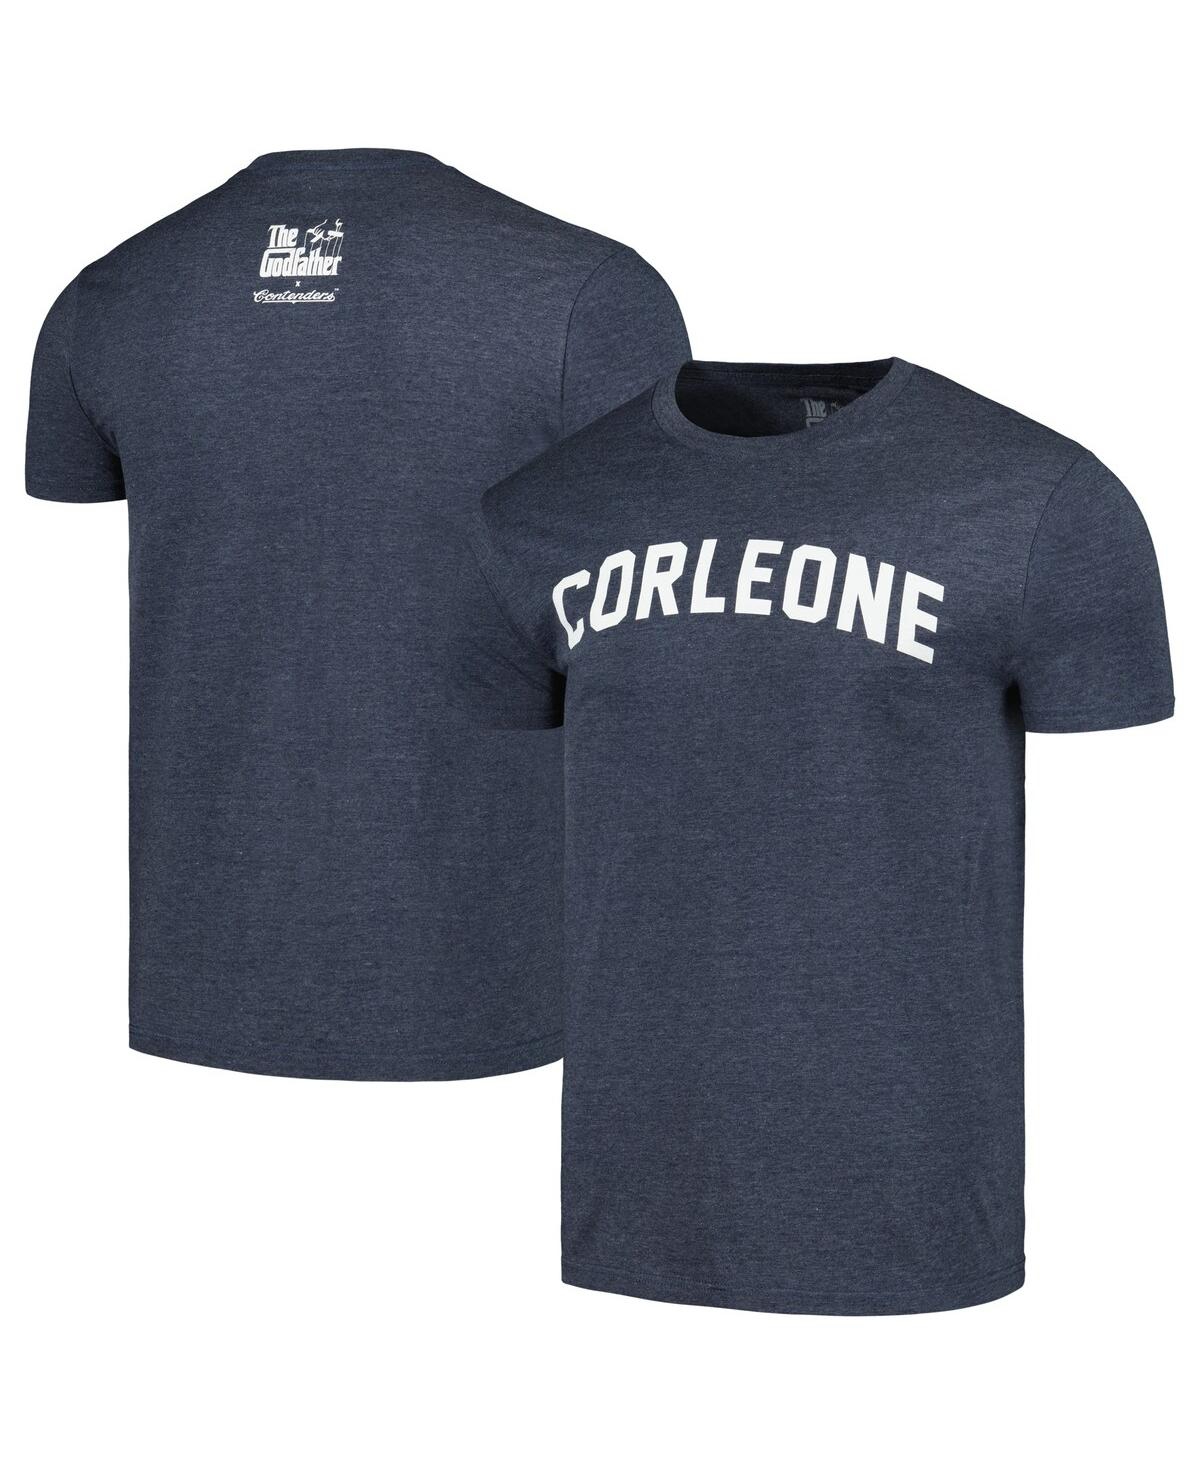 Men's Contenders Clothing Heather Navy The Godfather Corleone T-shirt - Heather Navy